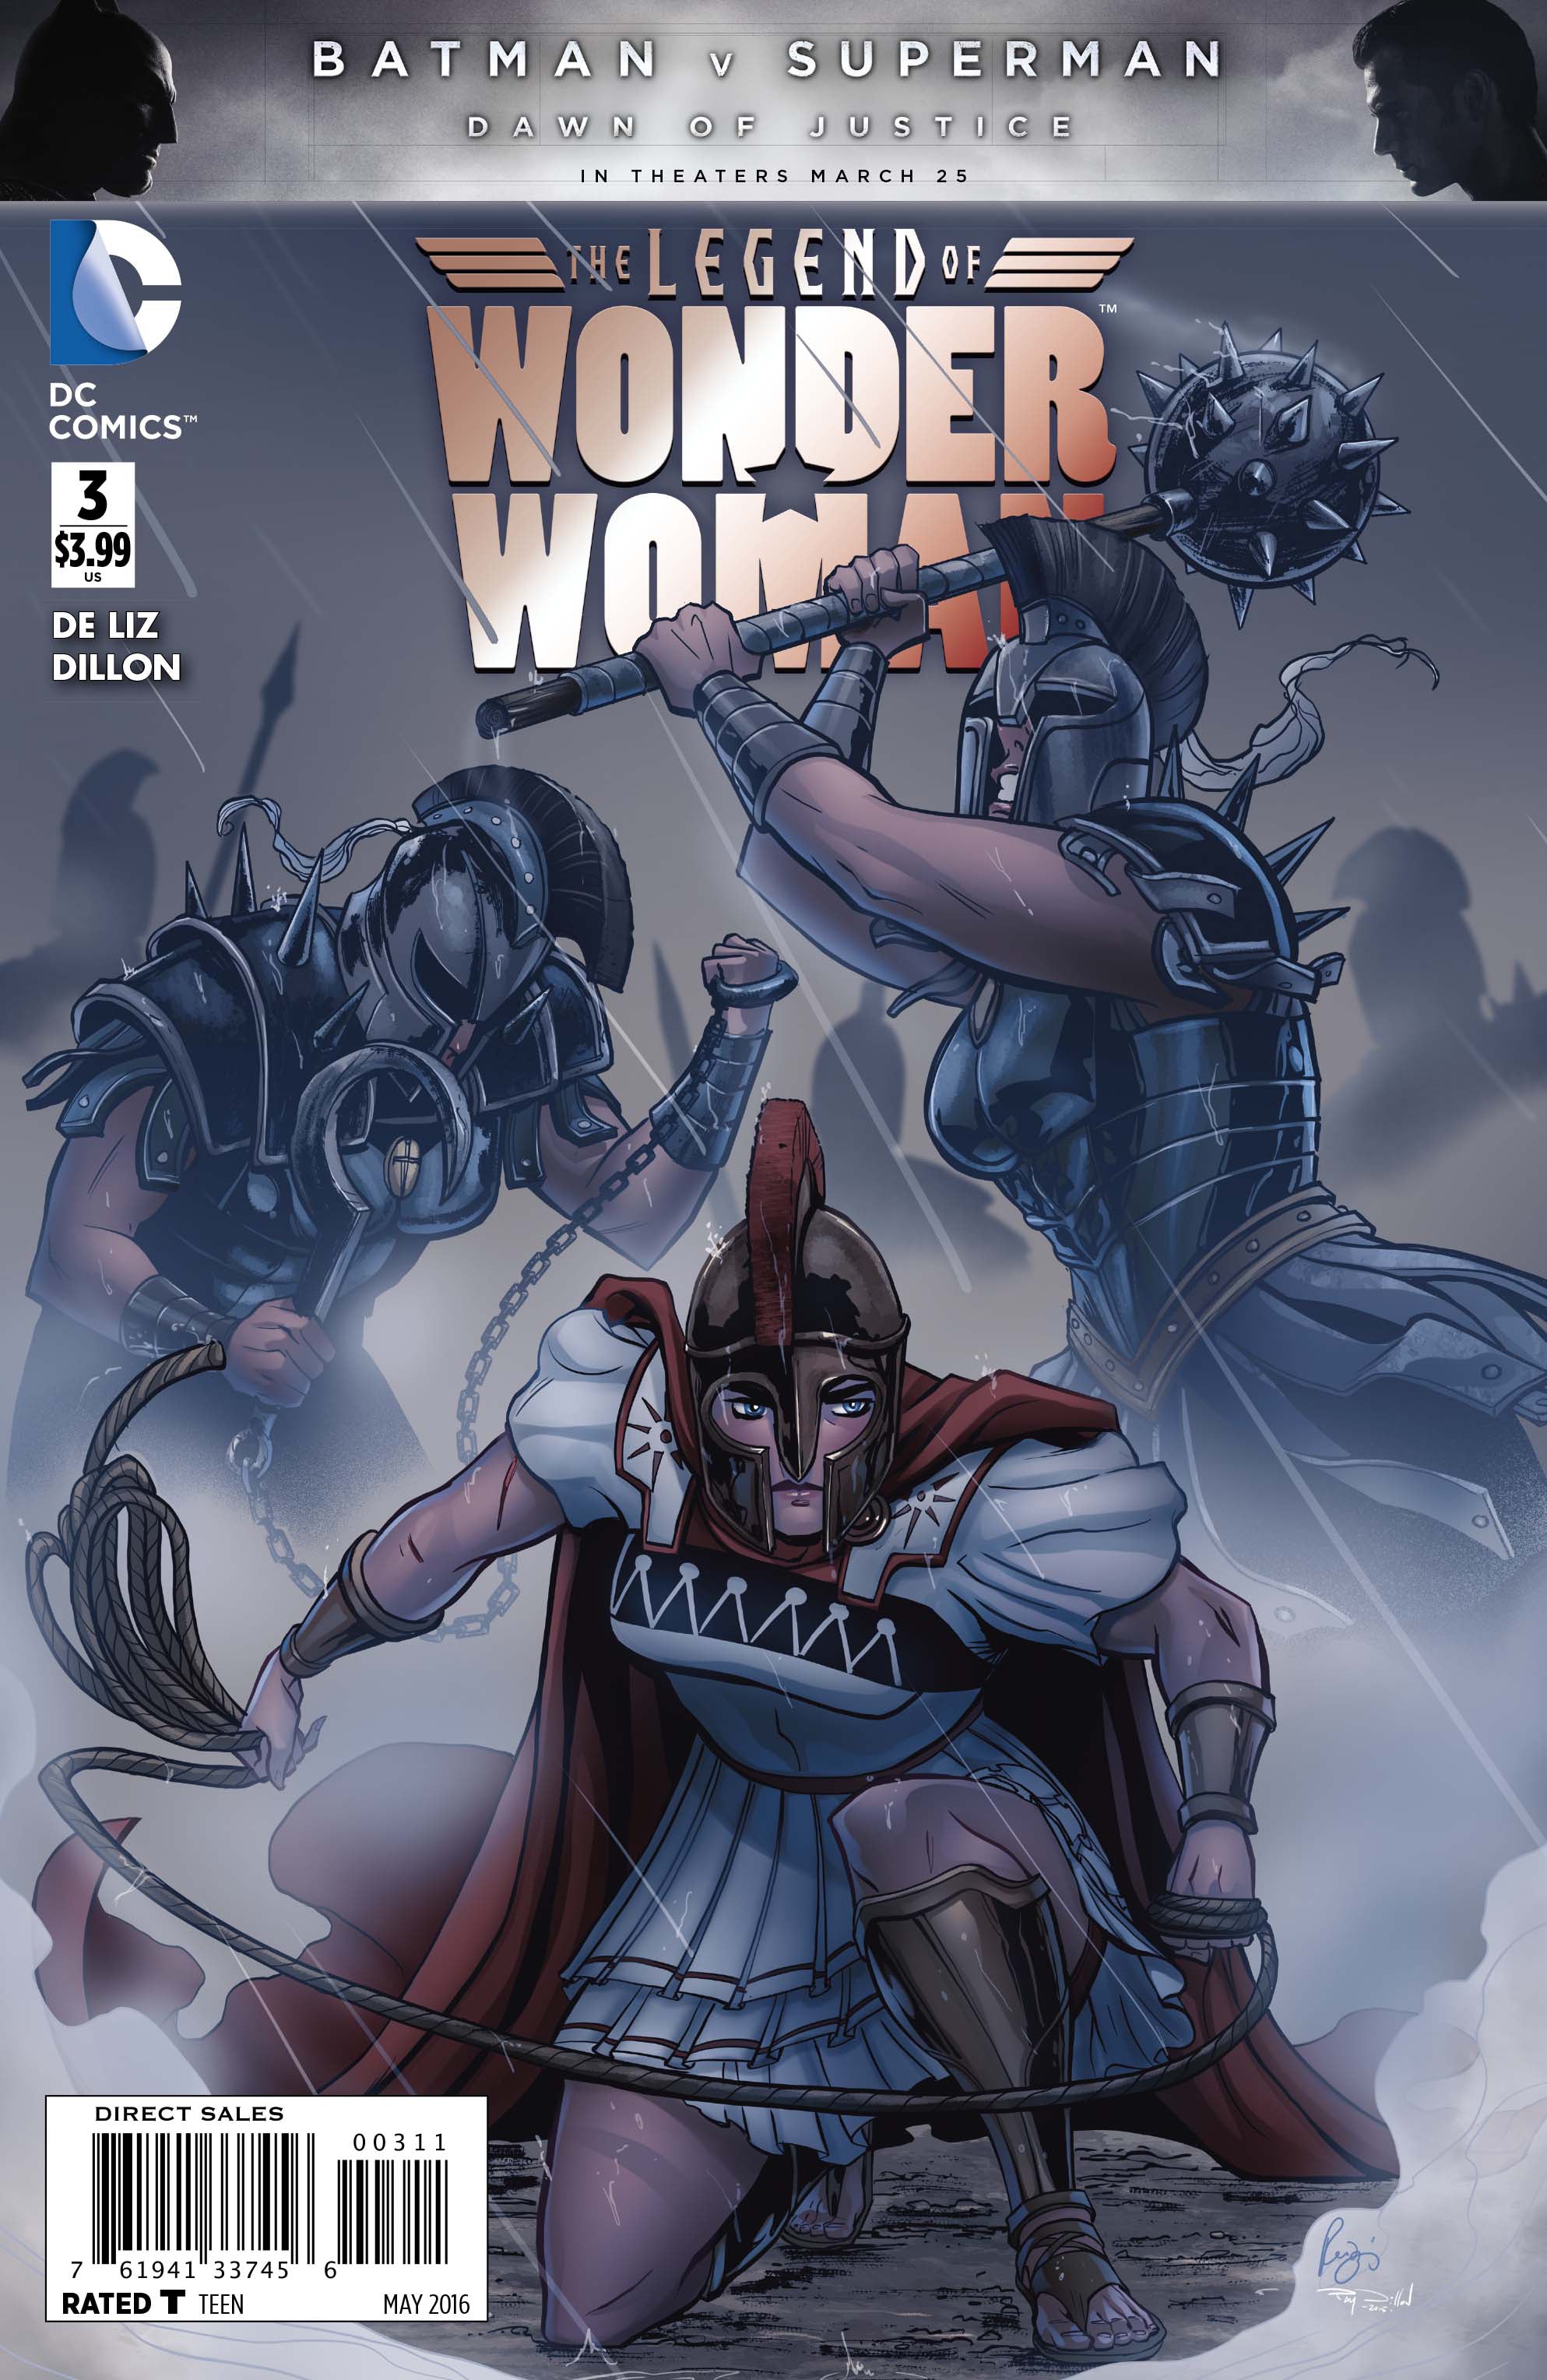 LEGEND OF WONDER WOMAN #3 (OF 9) | Game Master's Emporium (The New GME)